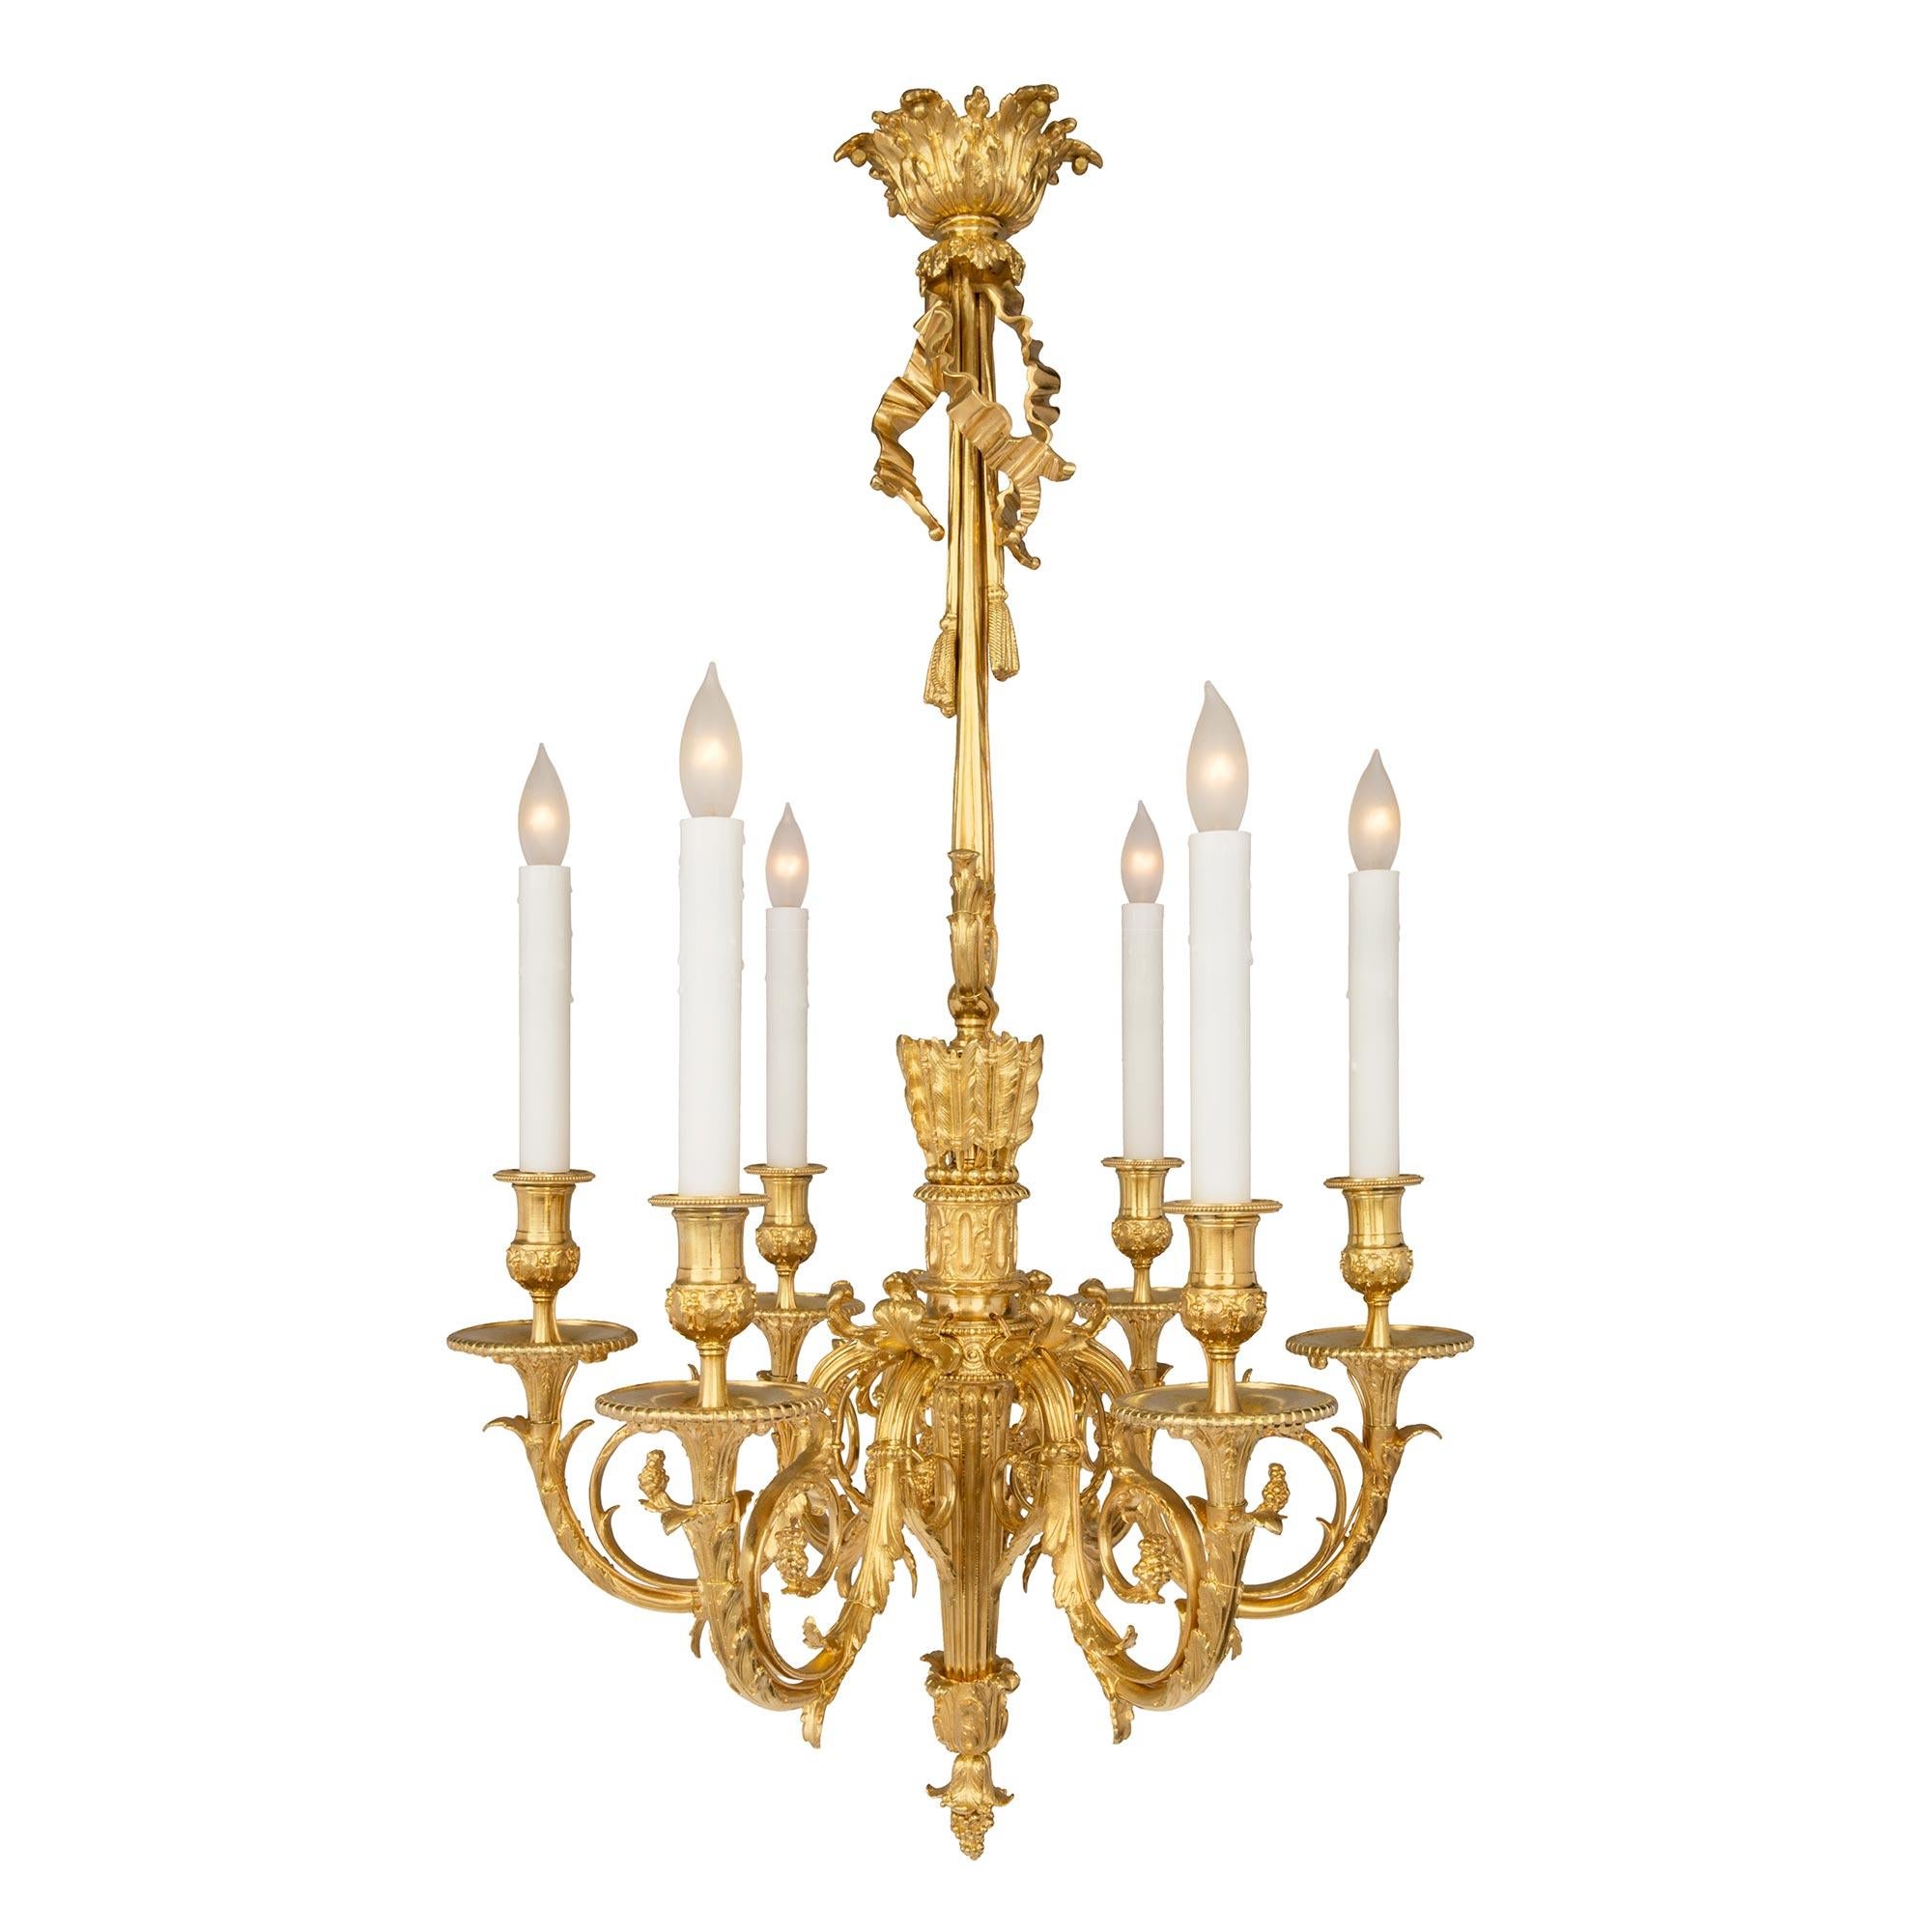 An extremely elegant and high quality French 19th century Louis XVI st. Belle Époque period six arm ormolu chandelier. The chandelier is centered by a charming and richly chased bottom acorn finial and large acanthus leaves. The striking fluted